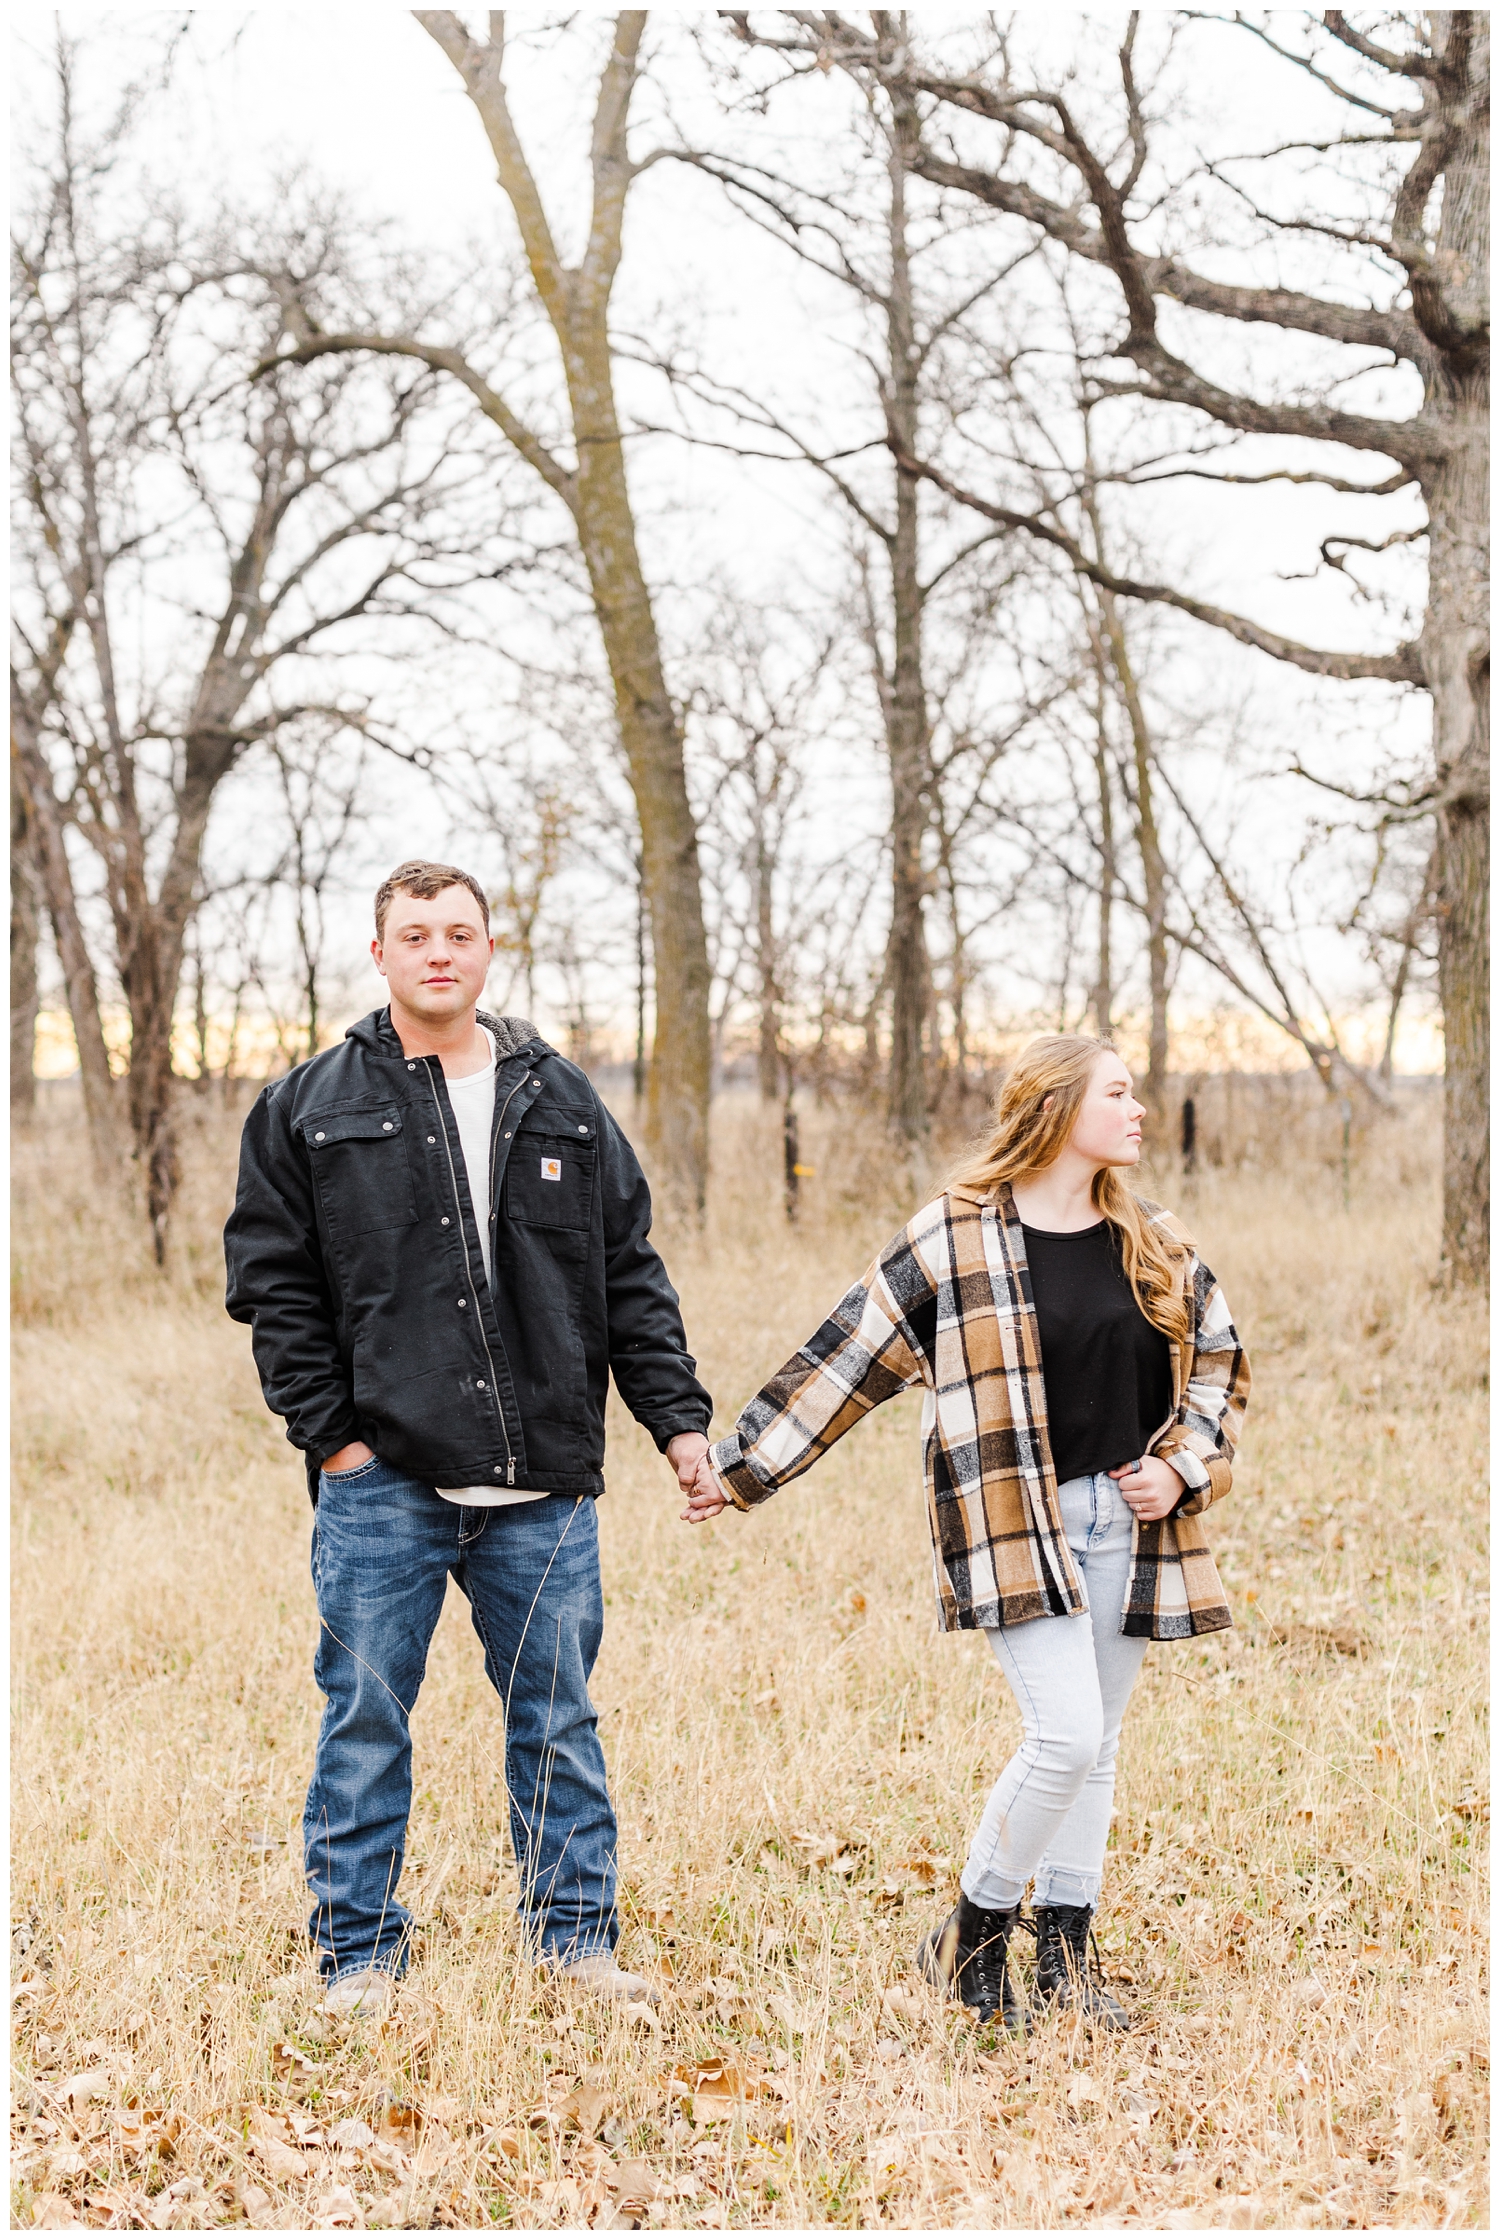 Travis and Abi hold hands in a grassy filed in Iowa in the middle of winter | CB Studio